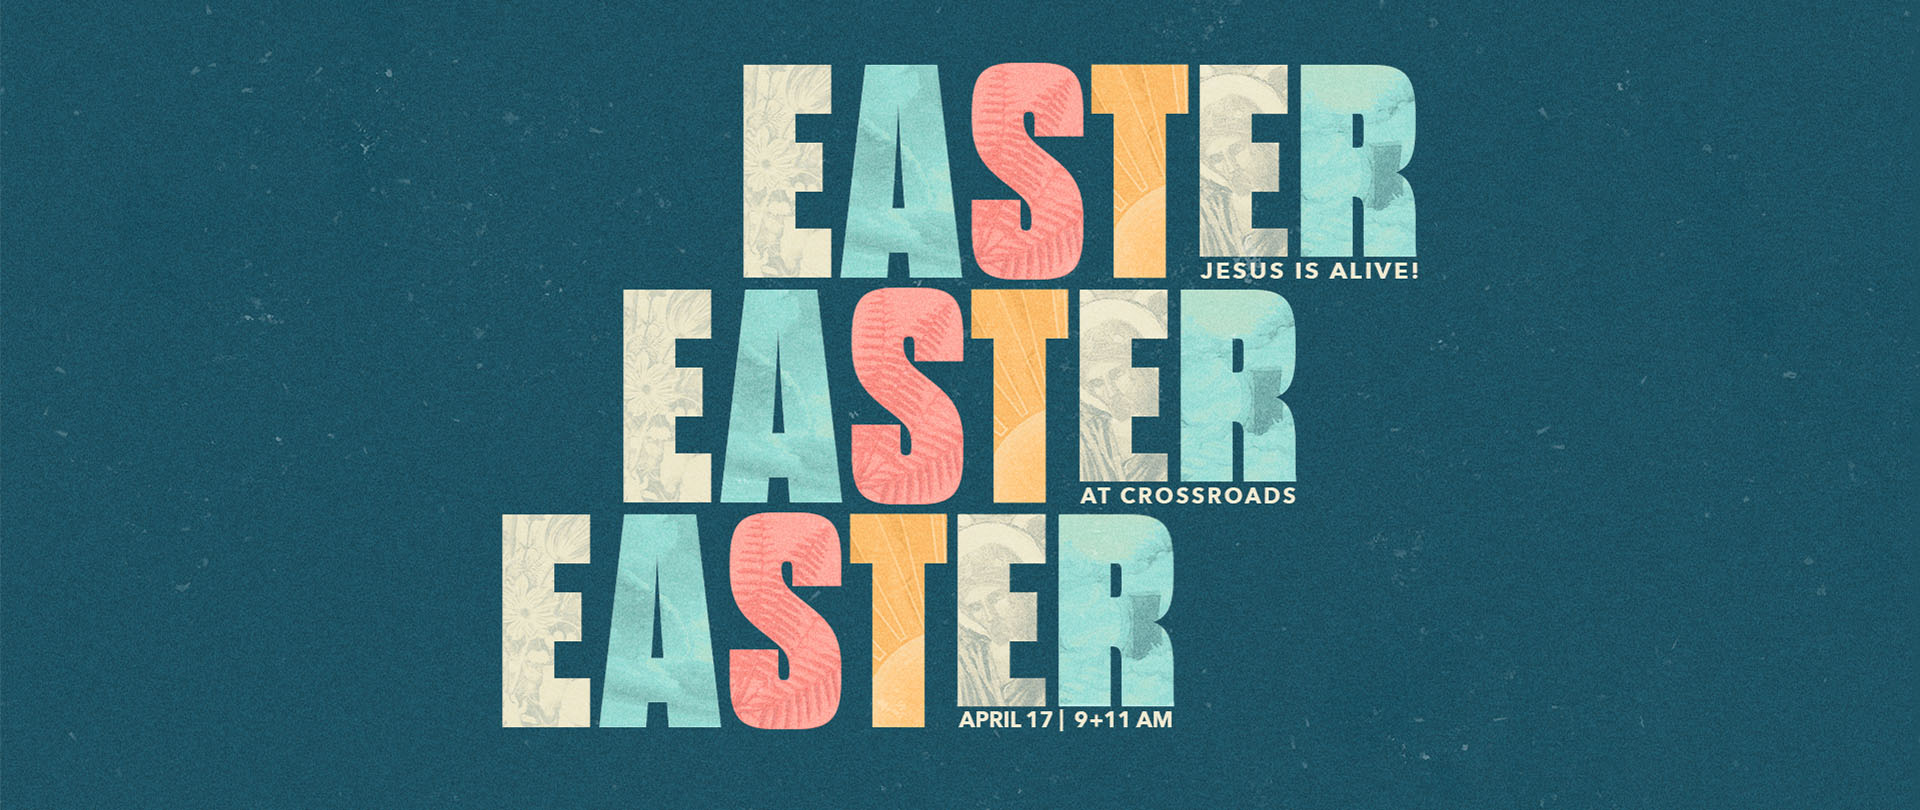 Easter at Crossroads
Sunday, April 17  |  9:00 & 11:00 AM
 
